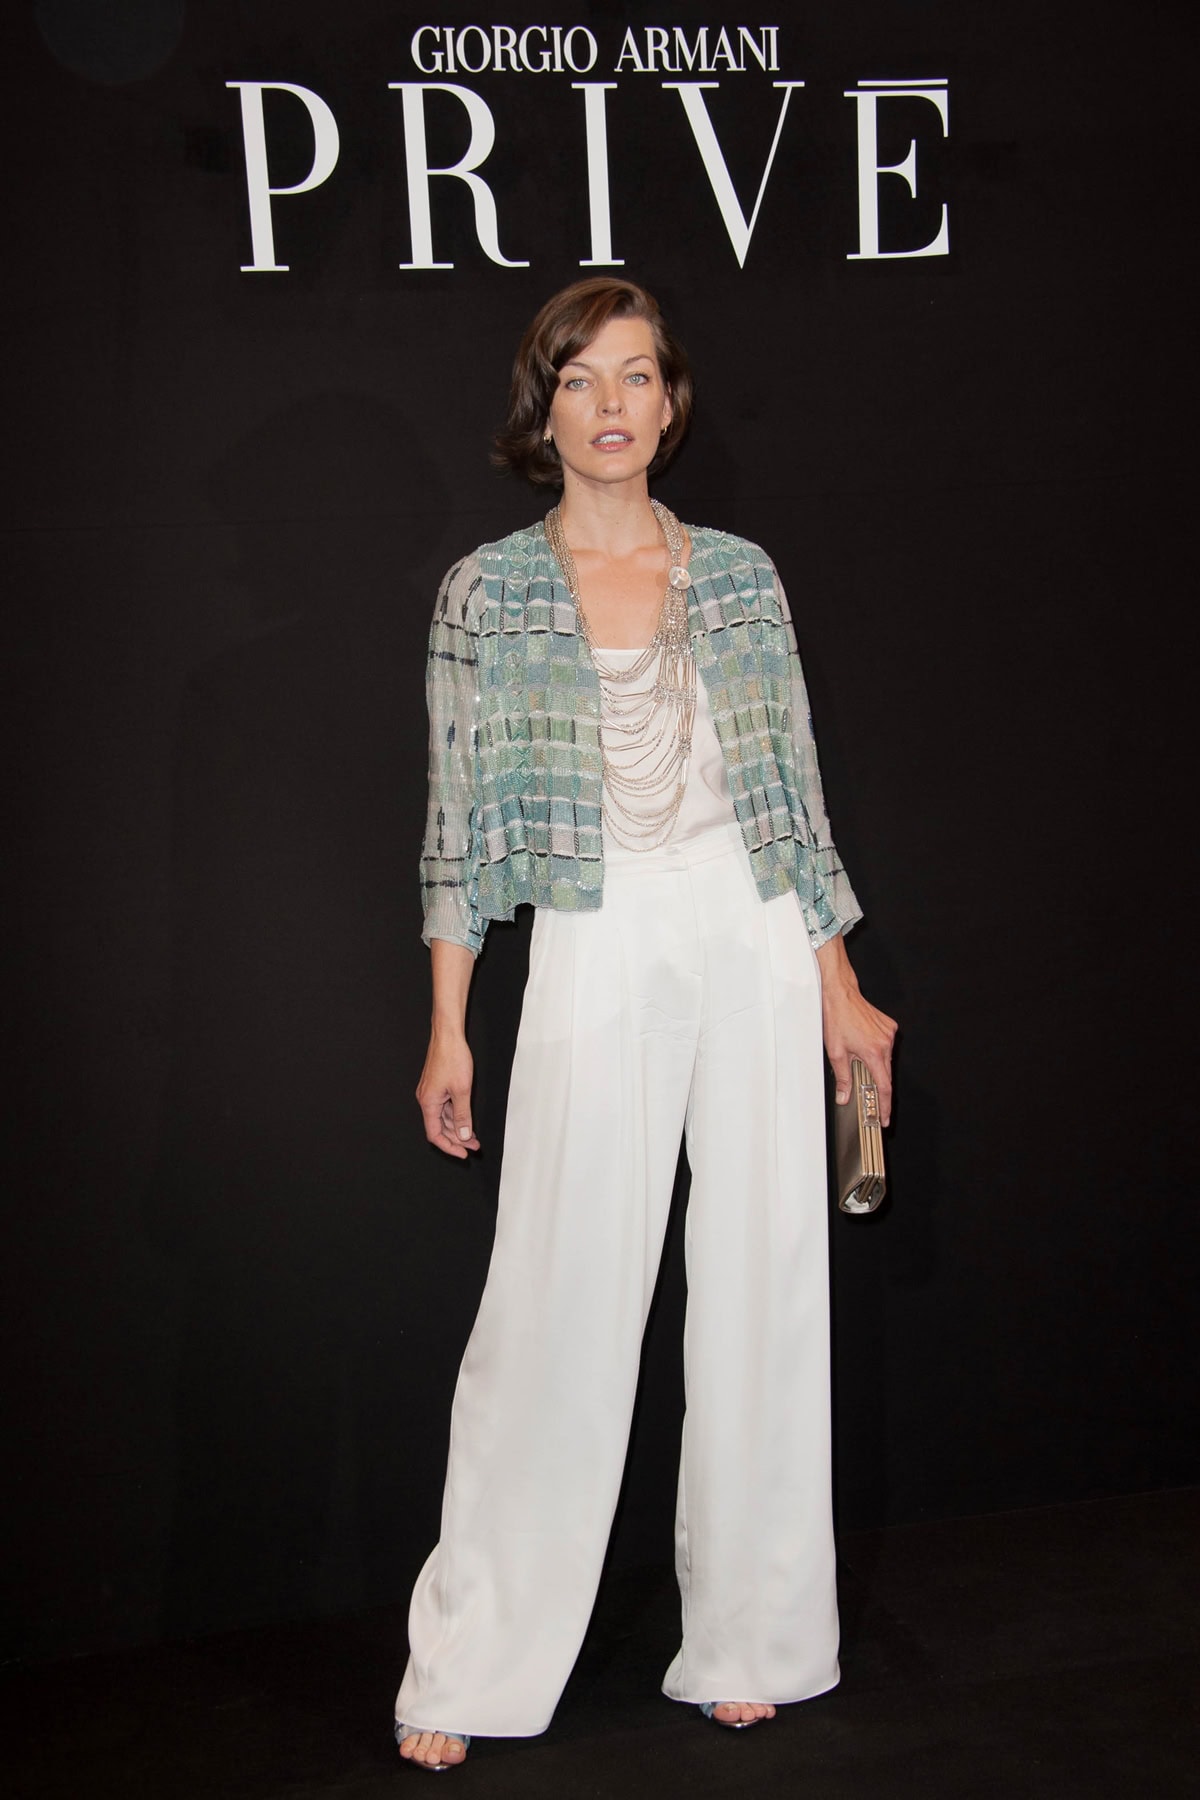 Milla Jovovich dazzled at the Giorgio Armani Couture Fall-Winter 2013-2014 in flared trousers, paired with a sea-green patterned jacket and strappy high heels, accessorized with a multi-strand beaded necklace and a small clutch